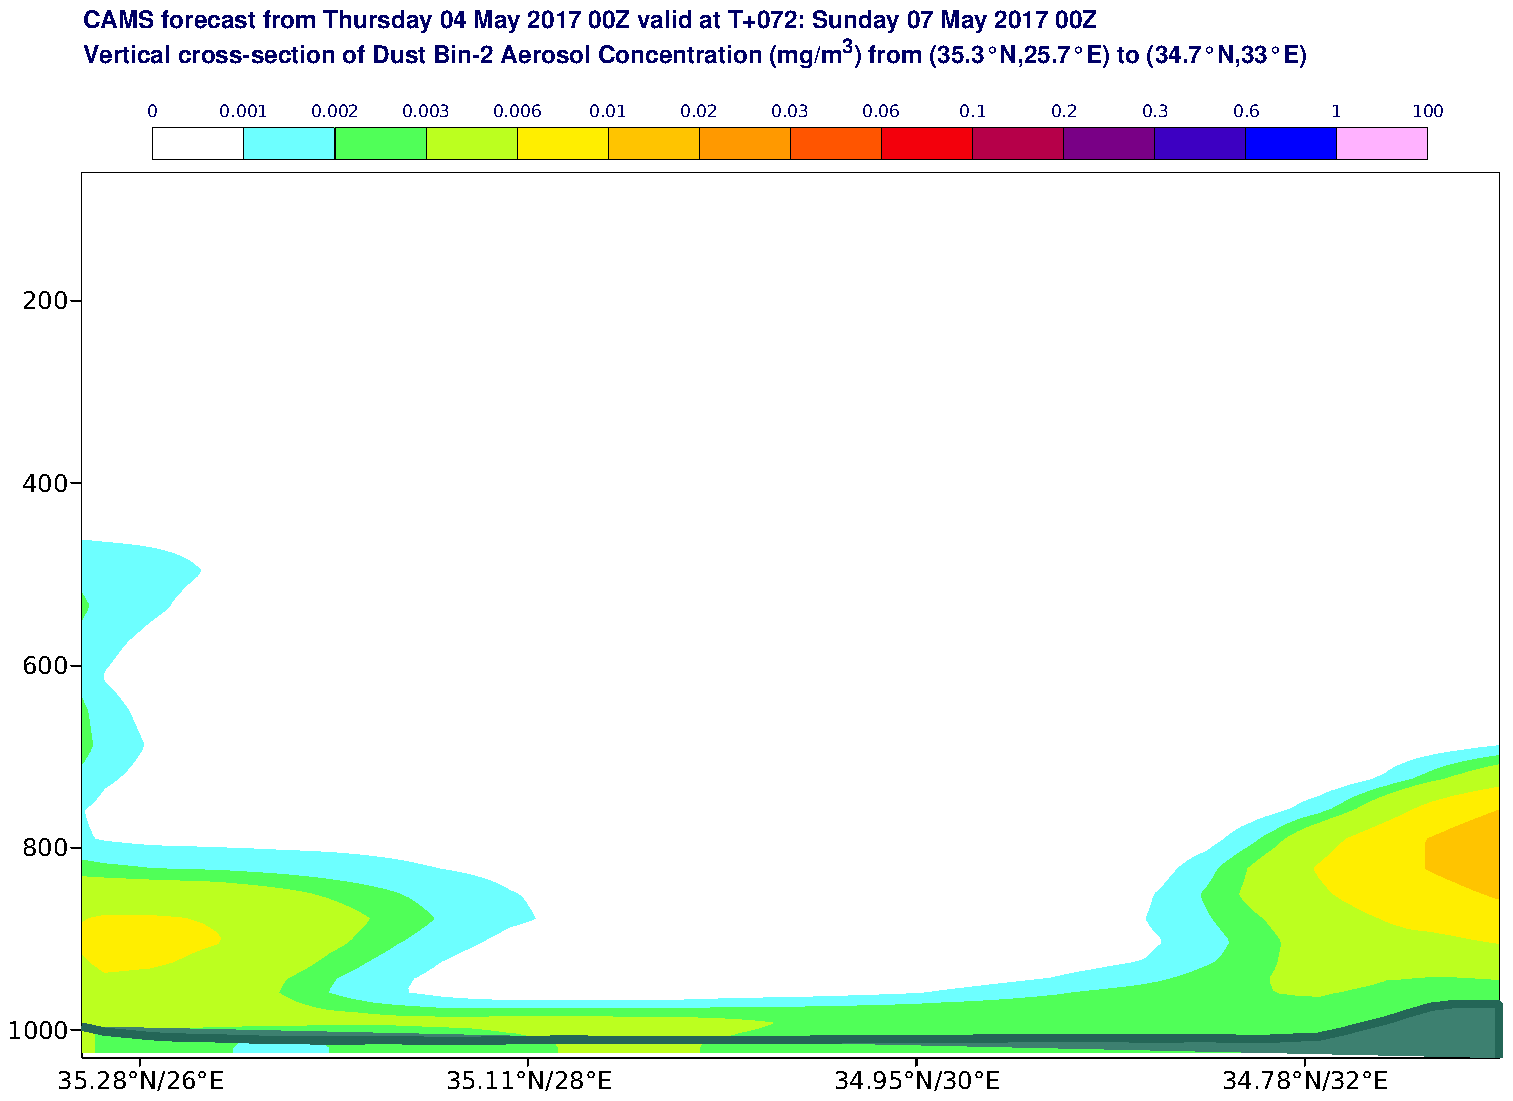 Vertical cross-section of Dust Bin-2 Aerosol Concentration (mg/m3) valid at T72 - 2017-05-07 00:00